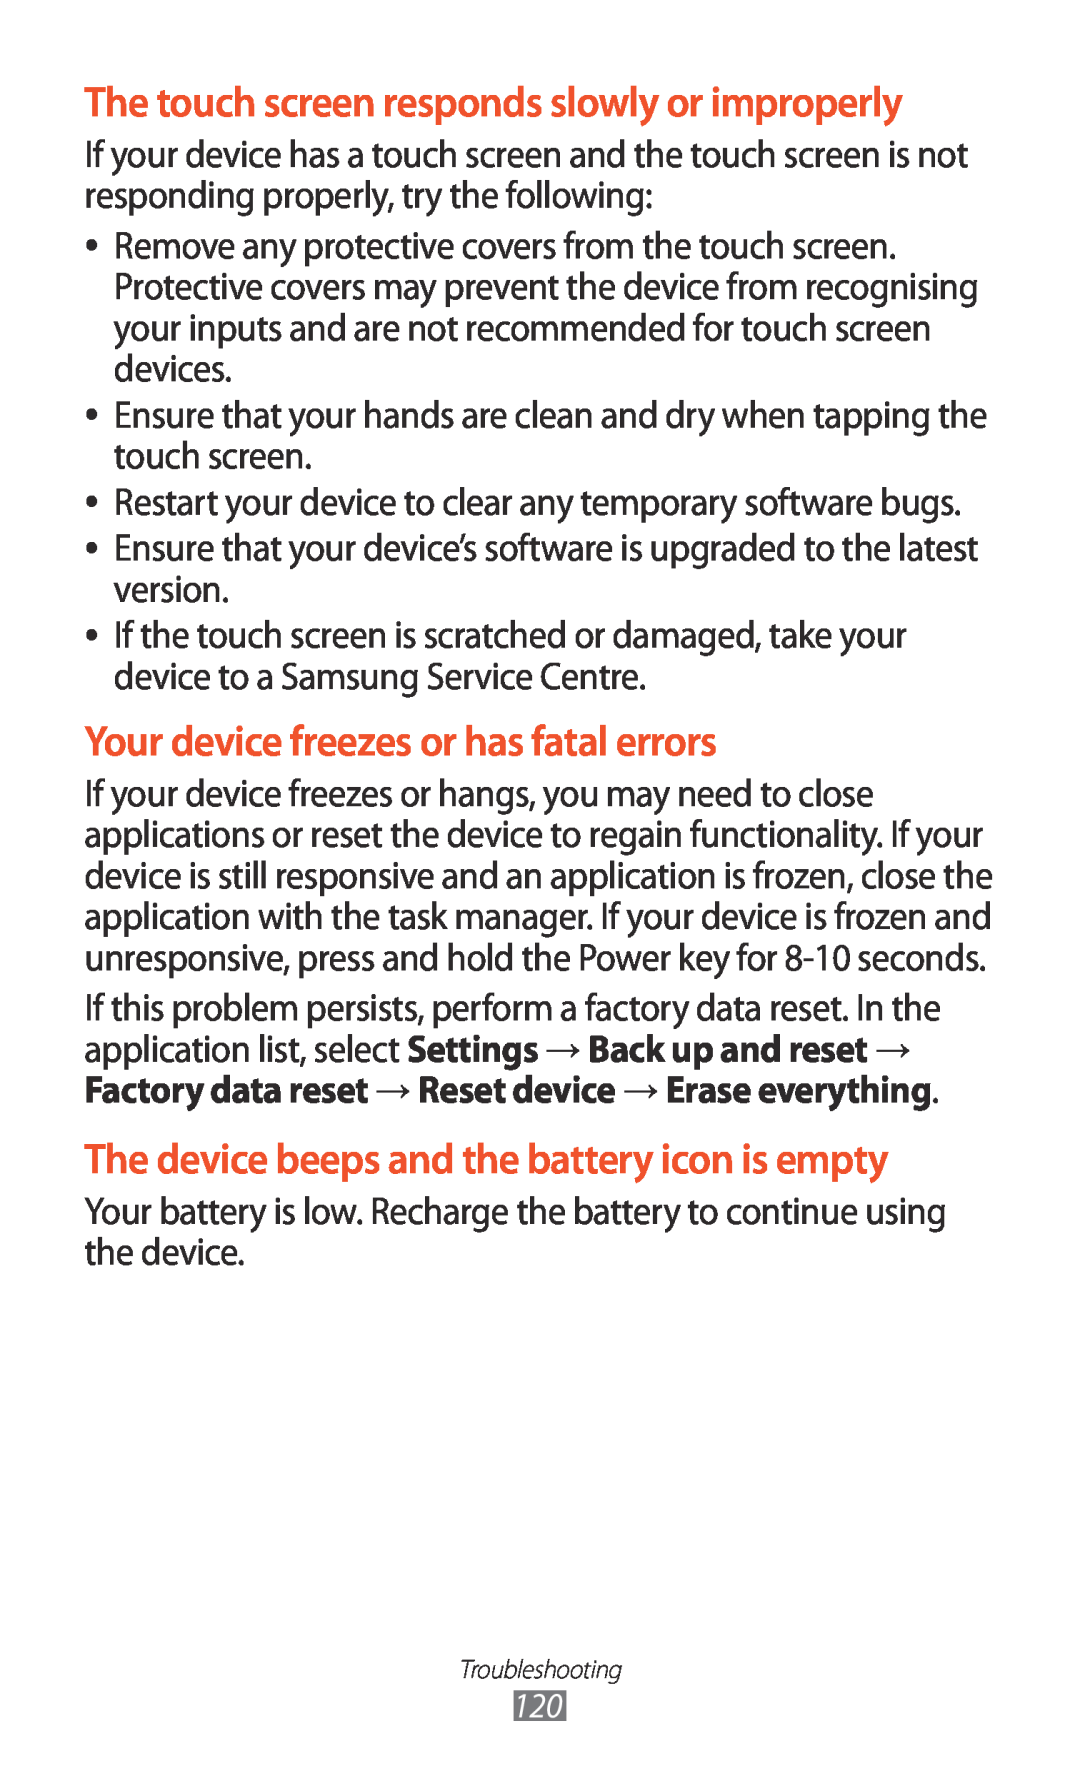 Samsung GT-P7500UWEXEZ manual Your device freezes or has fatal errors, The device beeps and the battery icon is empty 